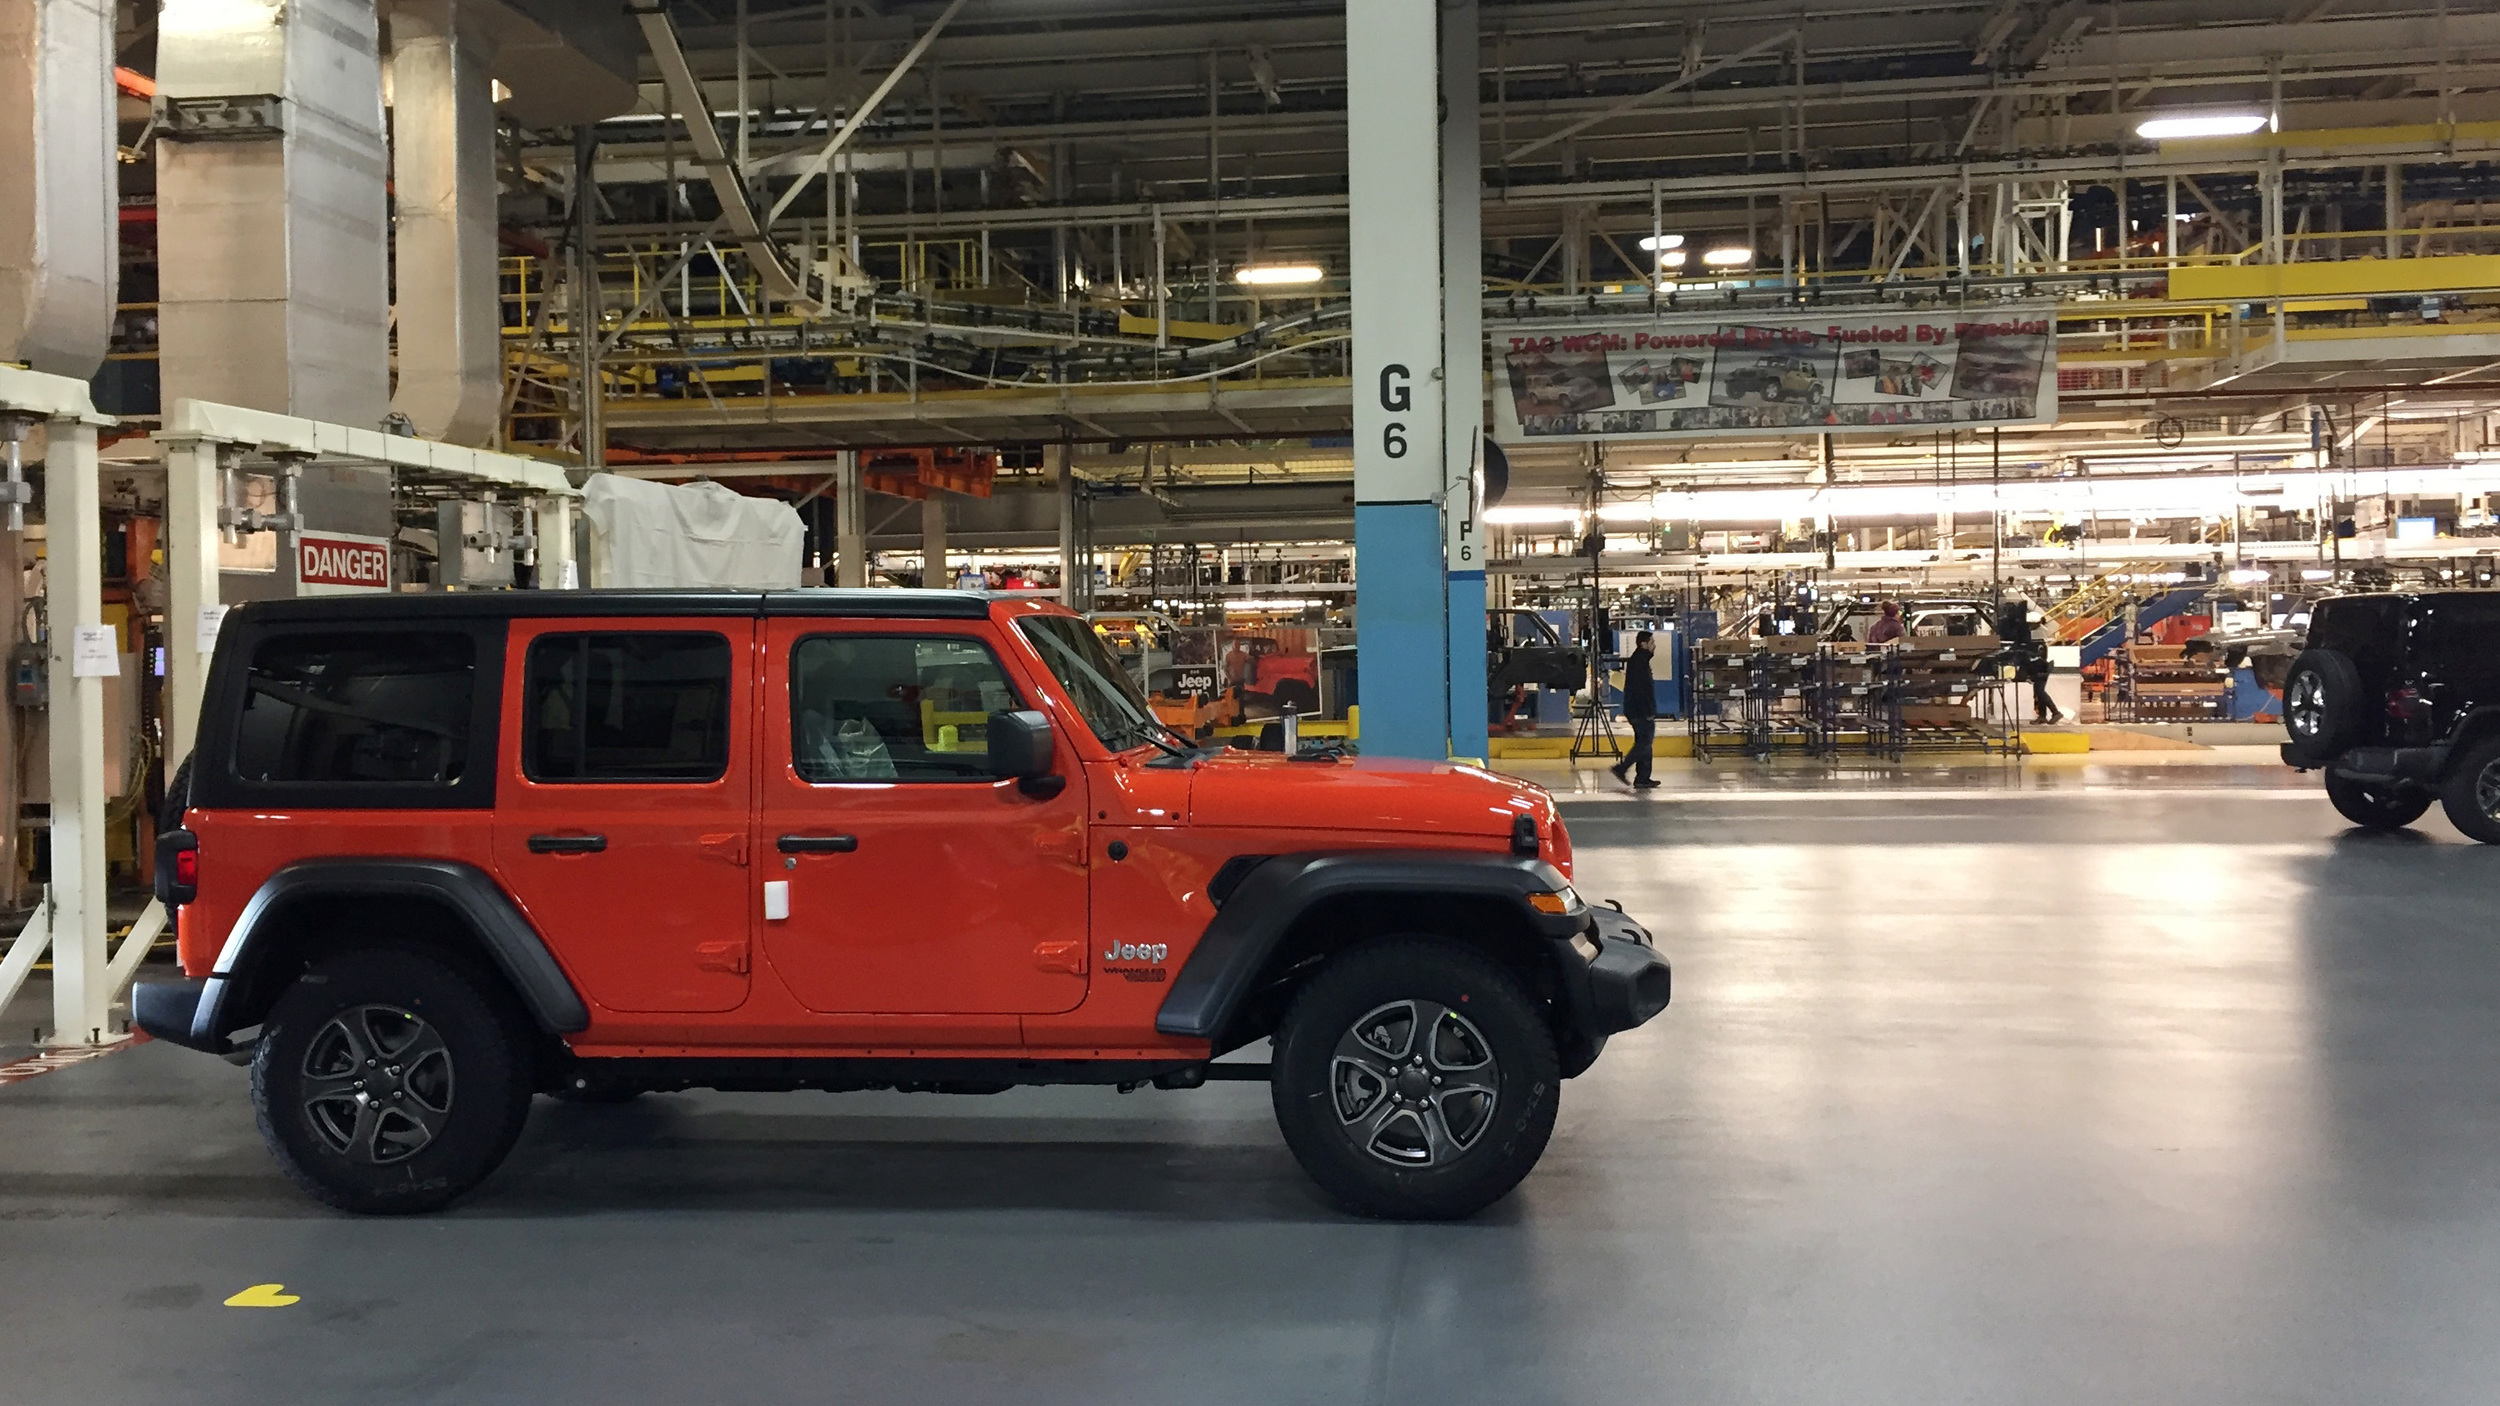 See how the Wrangler is built